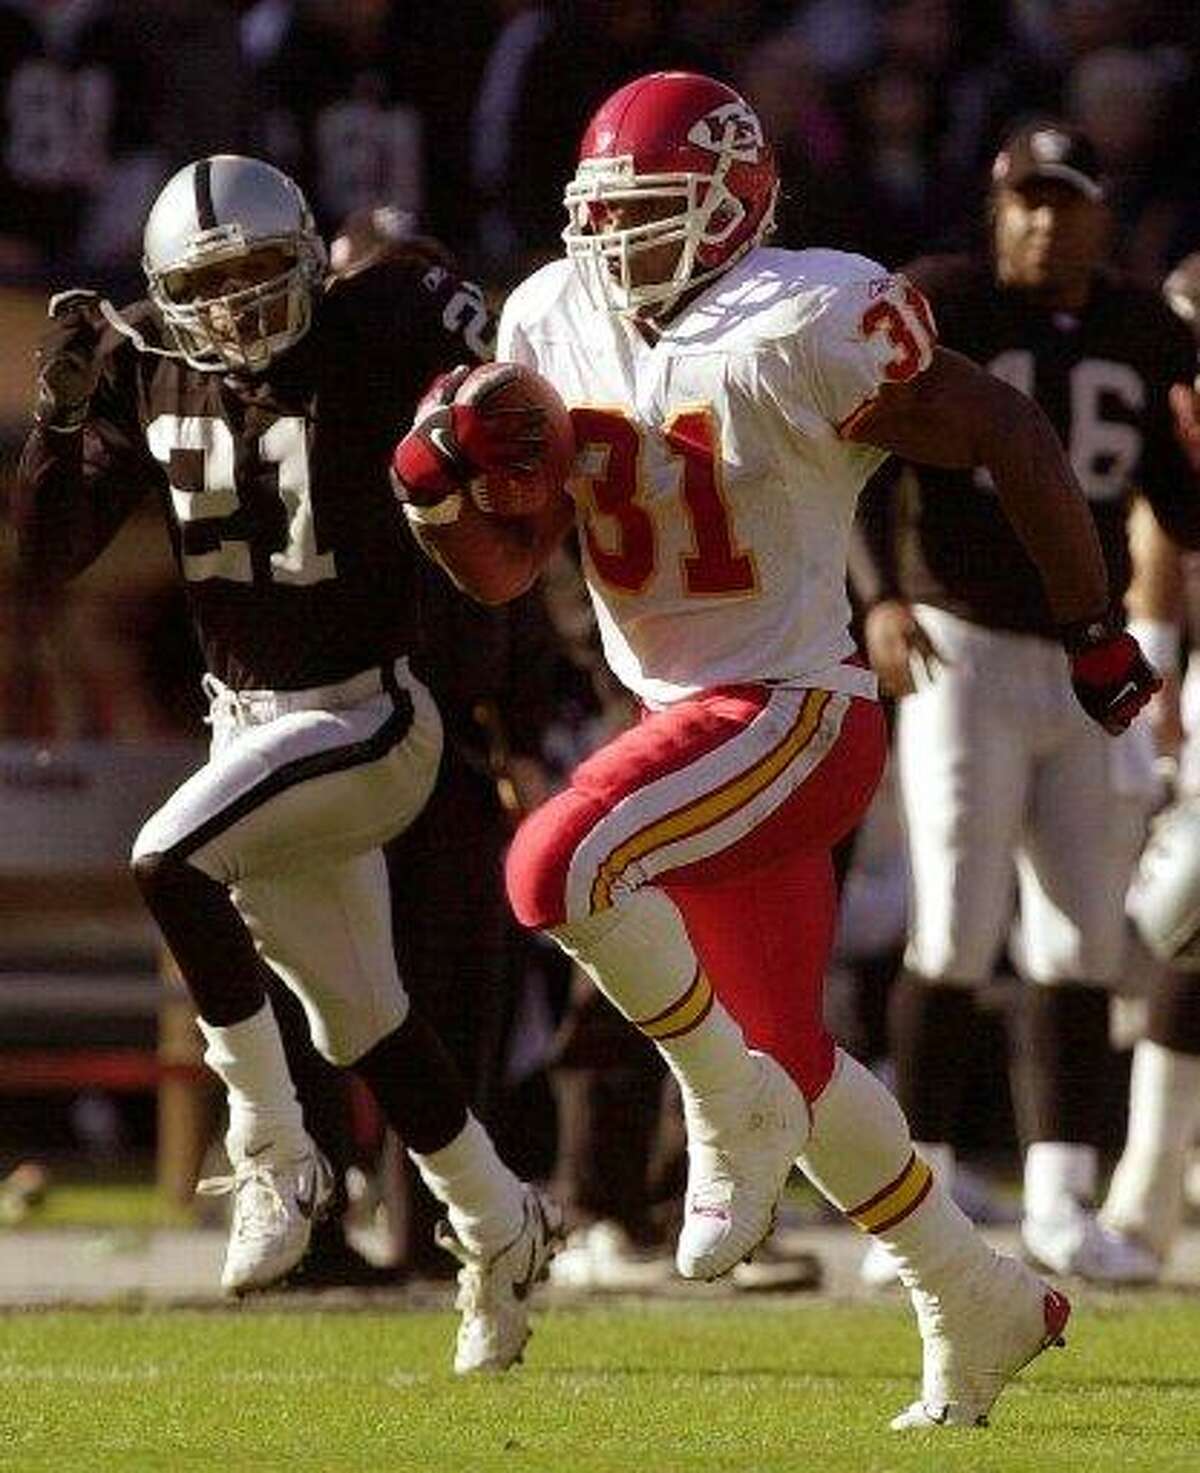 15 Minute Priest holmes workout for Beginner